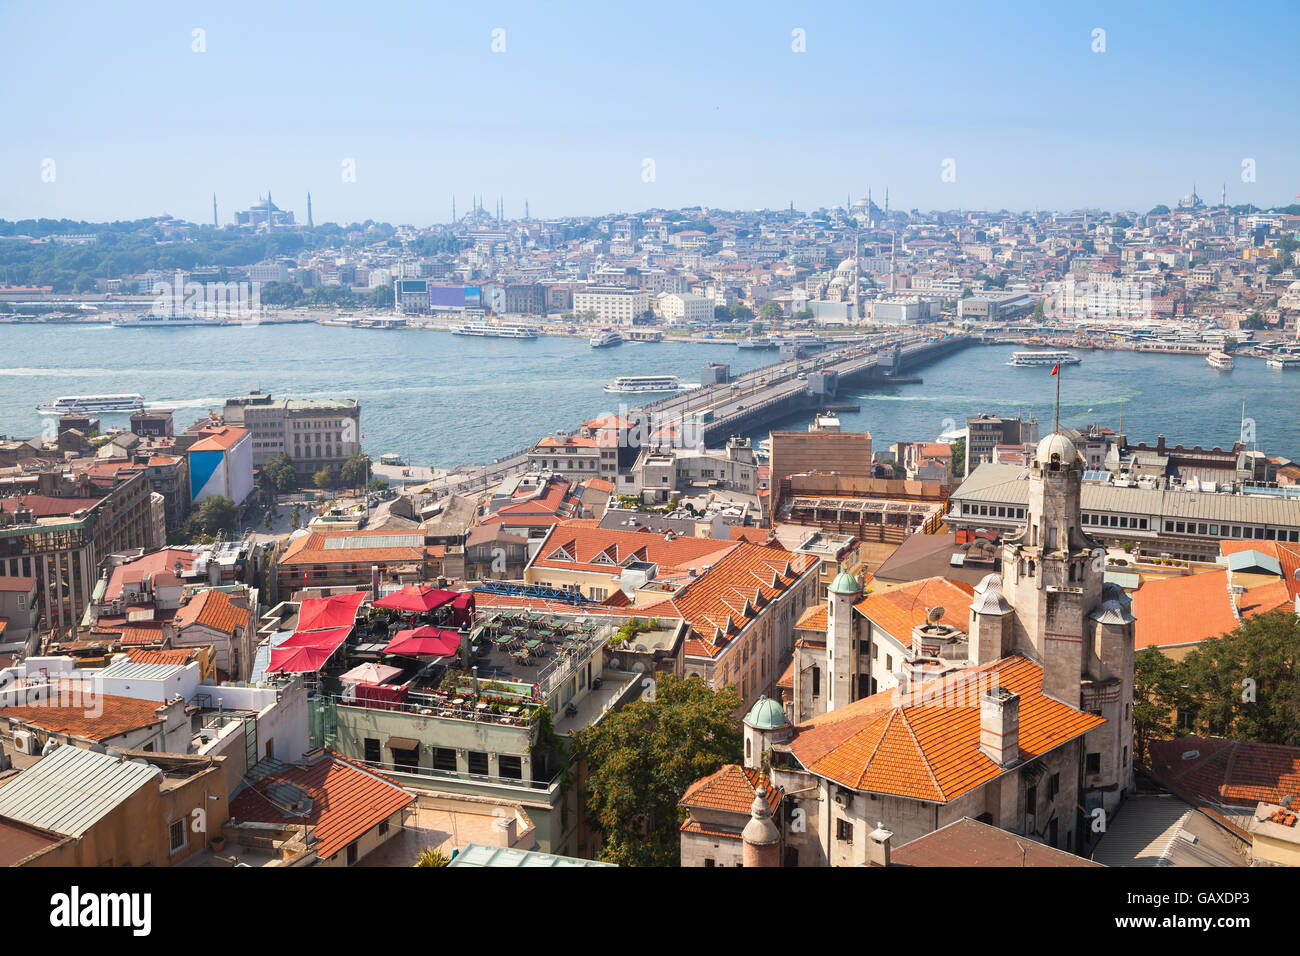 Istanbul, Turkey. Summer cityscape with bridge over Golden Horn a major urban waterway and the primary inlet of the Bosphorus. P Stock Photo